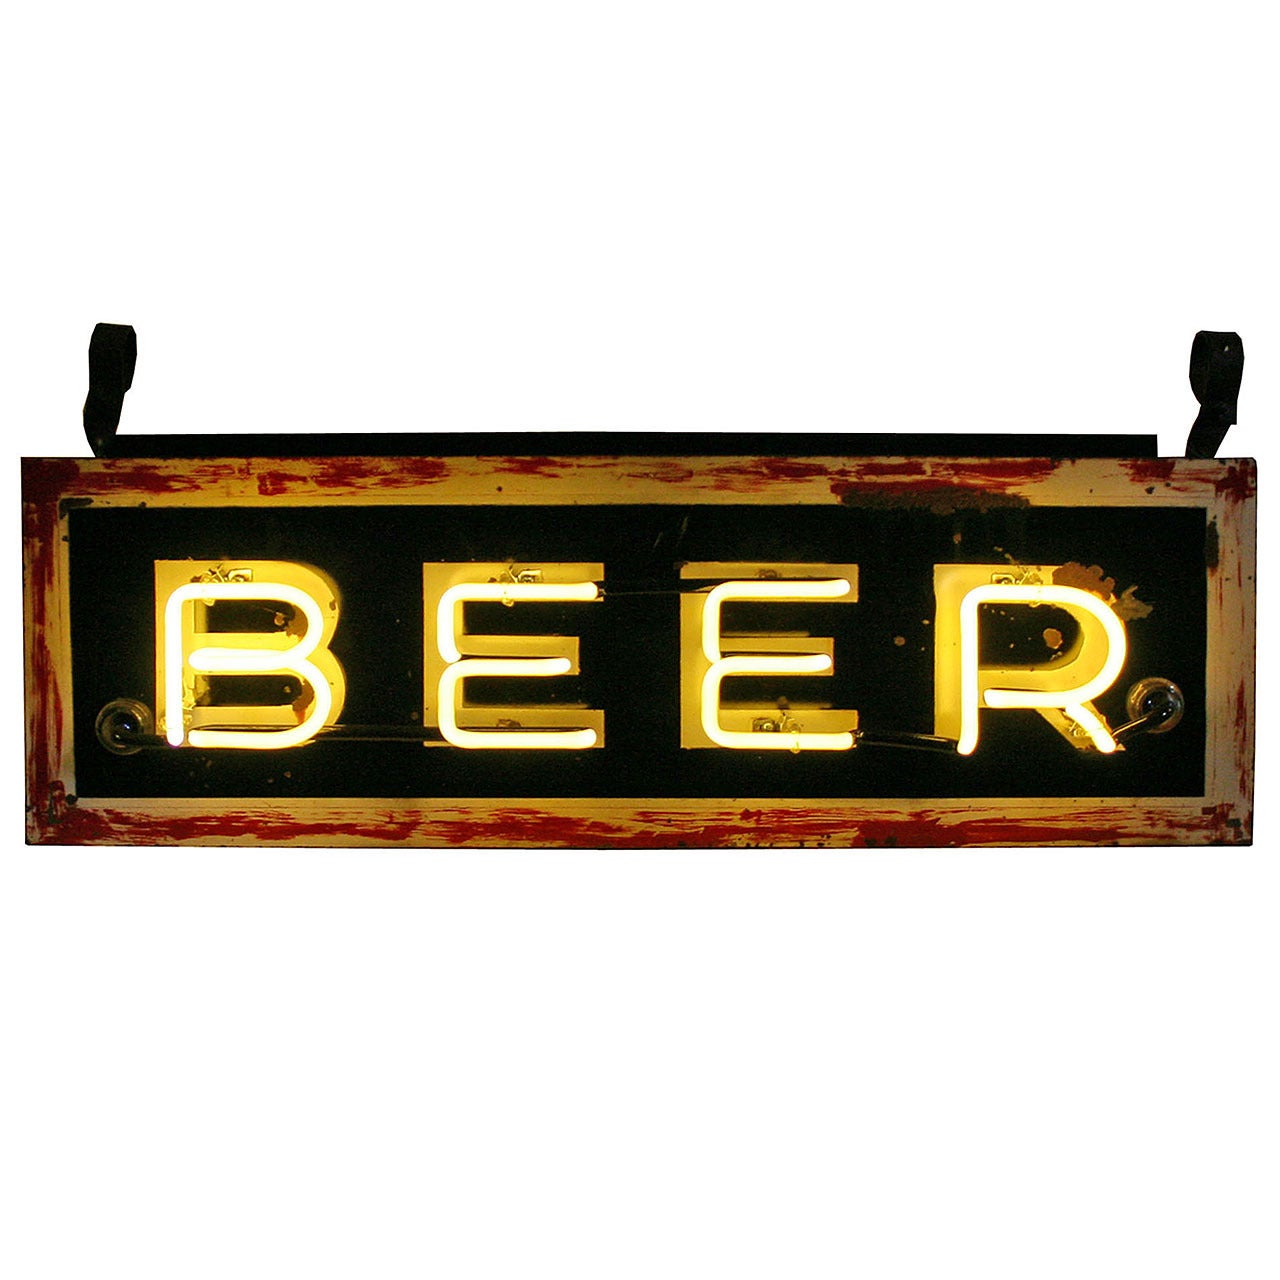 Double-Sided Neon Beer Sign, circa 1945